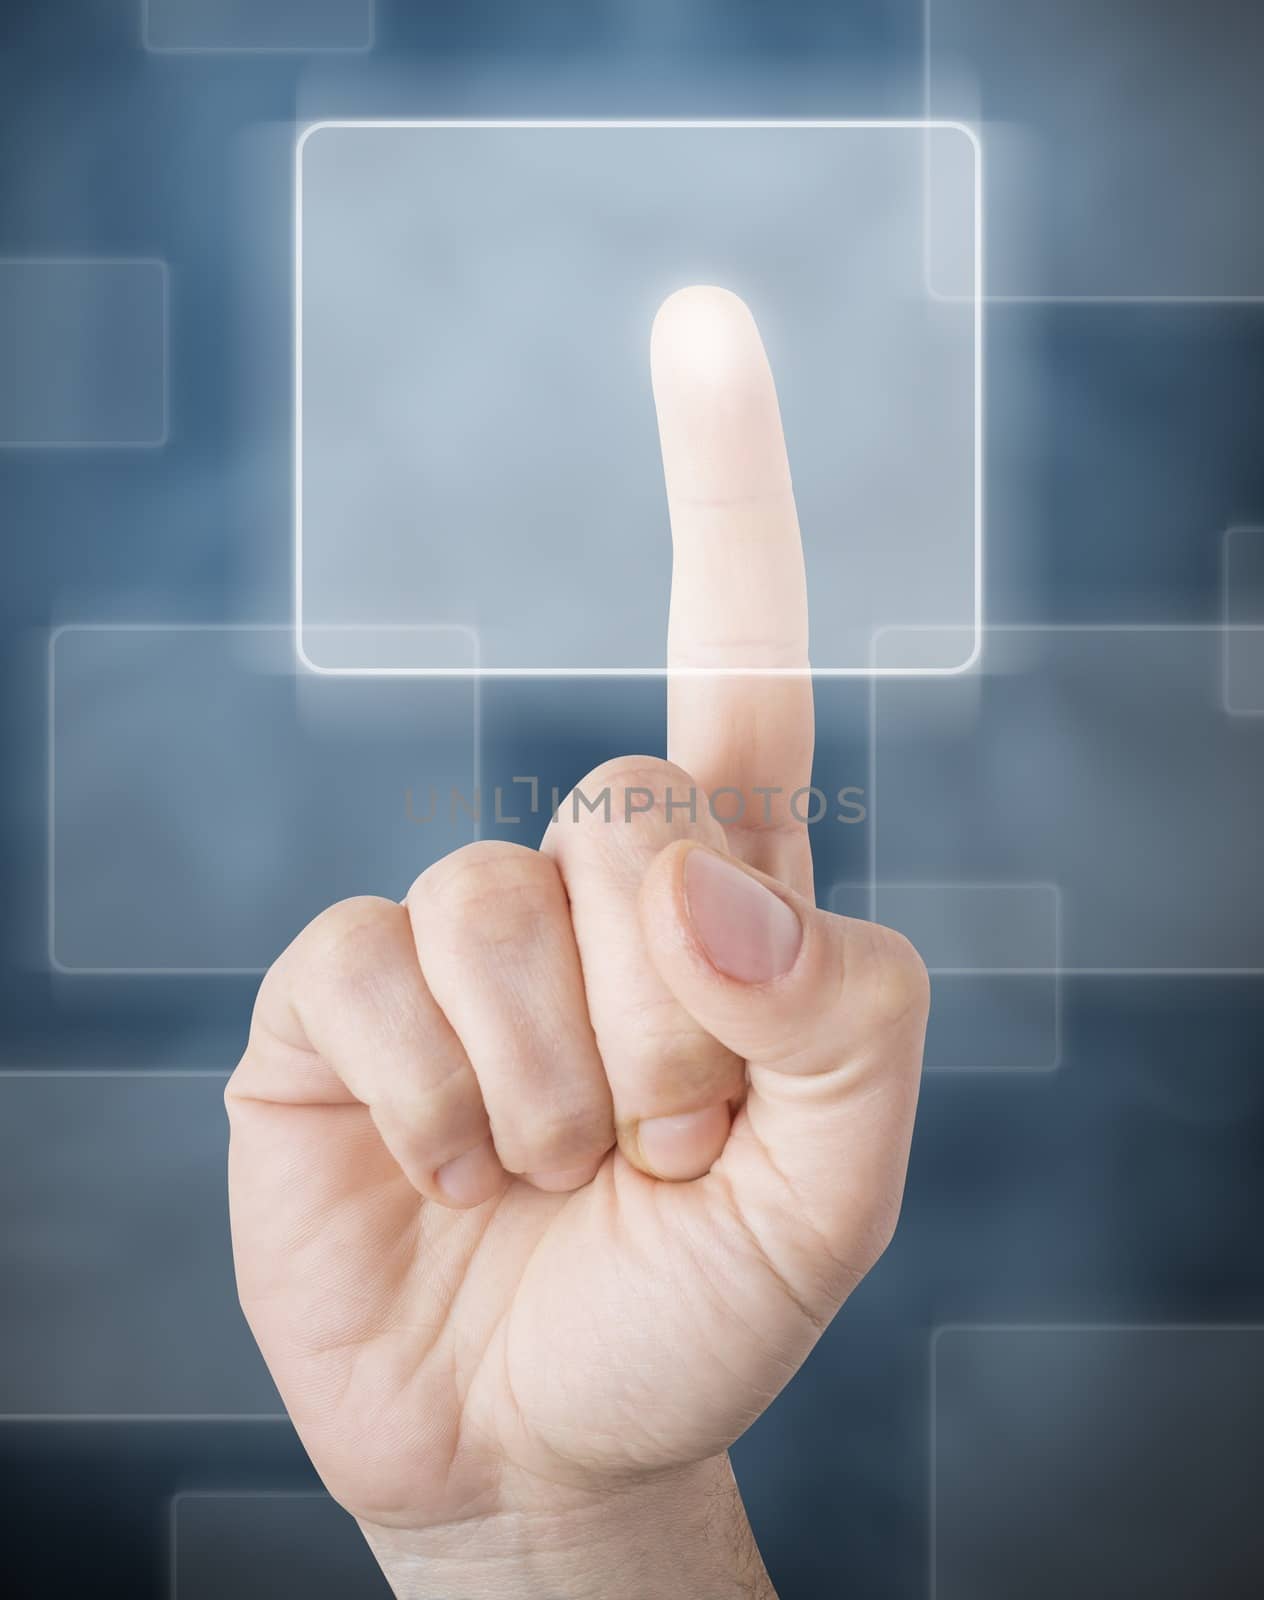 Picture of a finger pointing on a transparent device.

